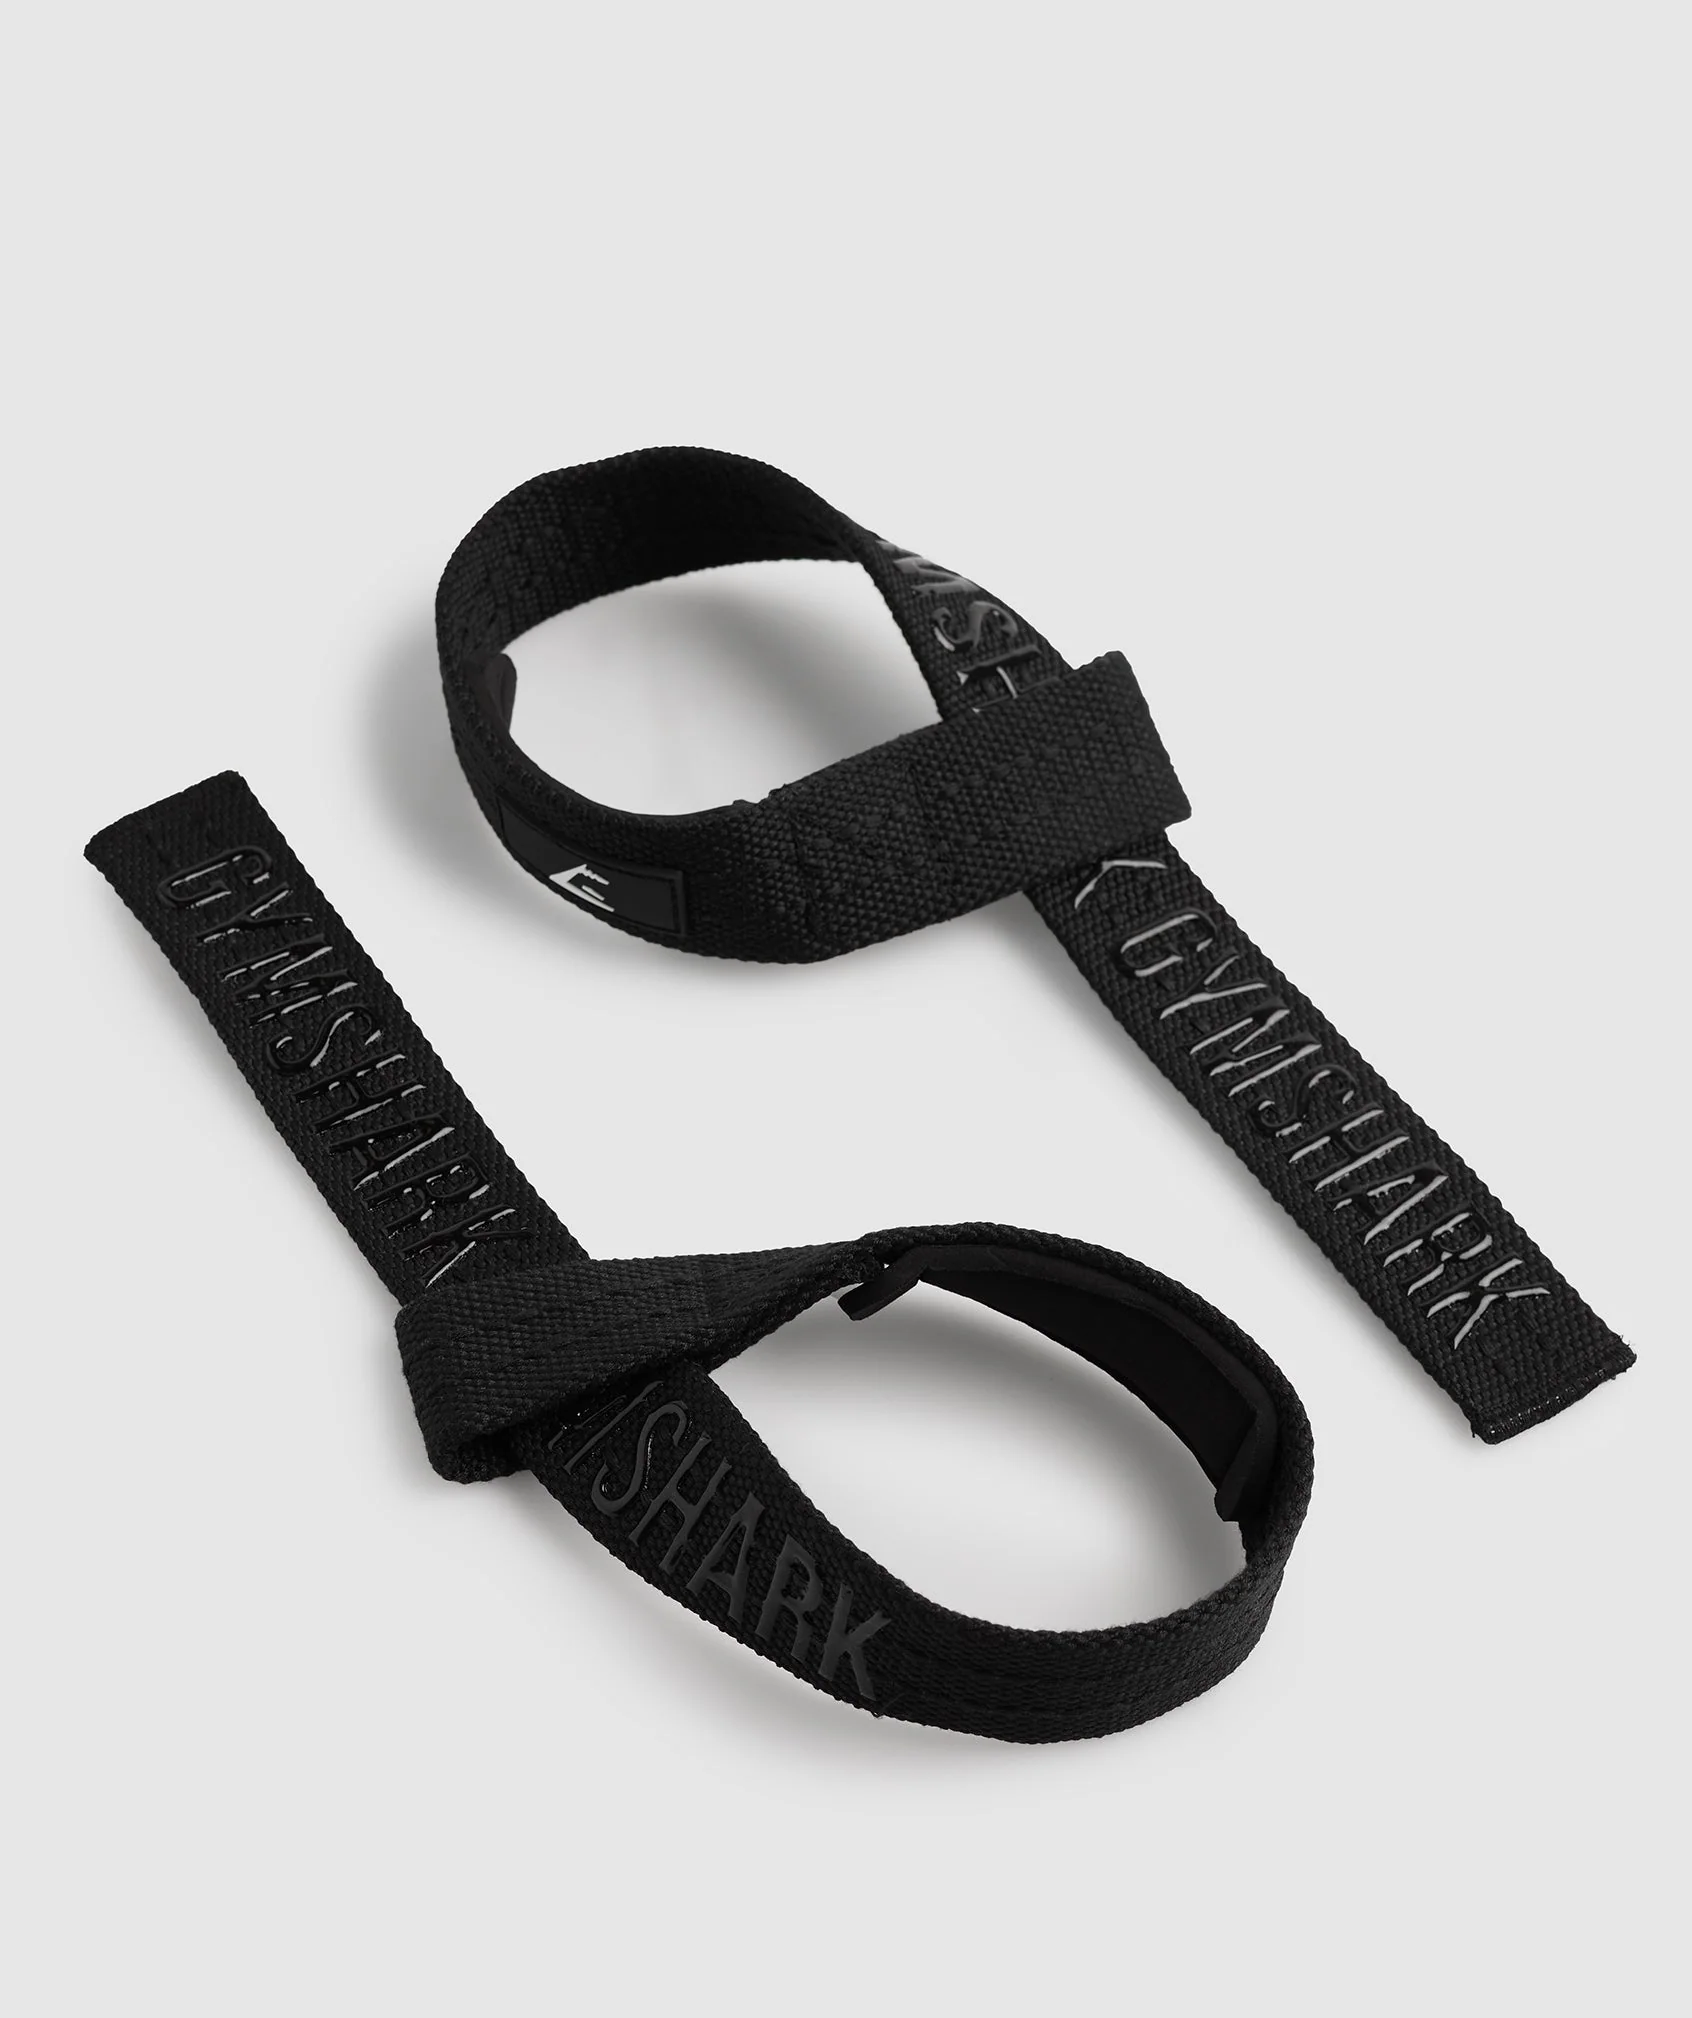 6 reasons to buy/not to buy Gymshark Silicone Grip Lifting Straps